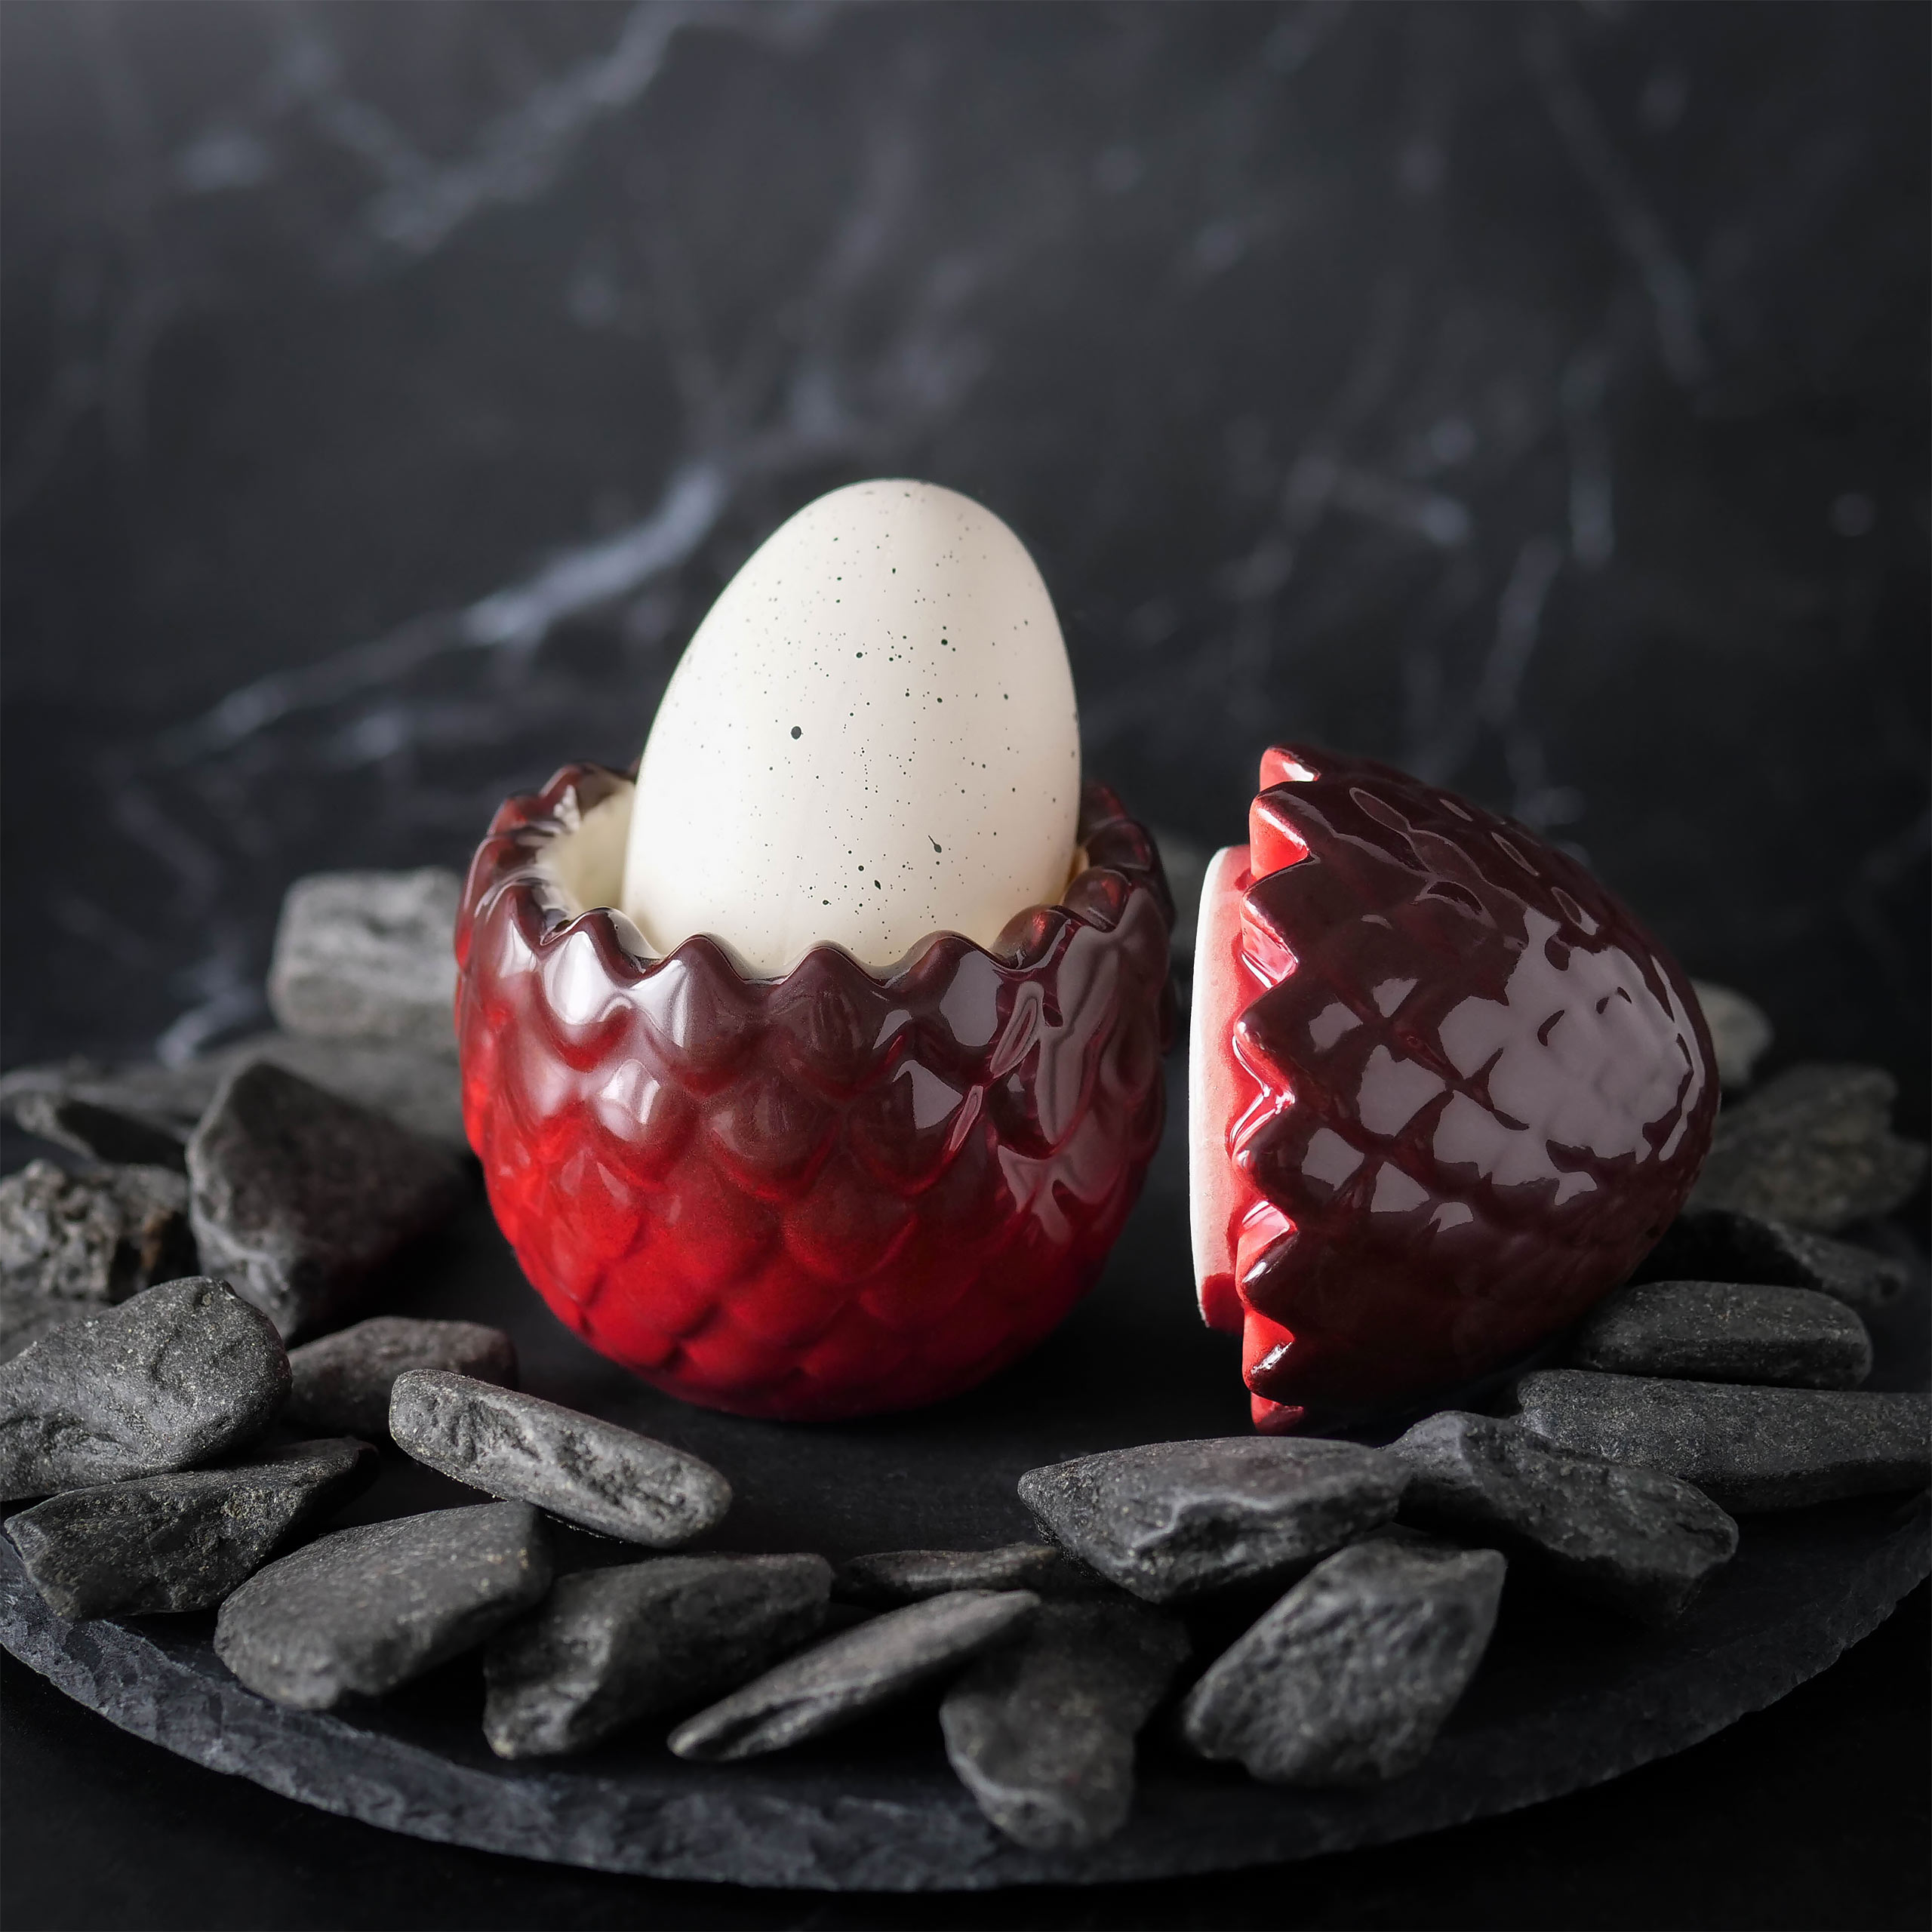 Game of Thrones - Dragon Egg Egg Cup and Salt Shaker